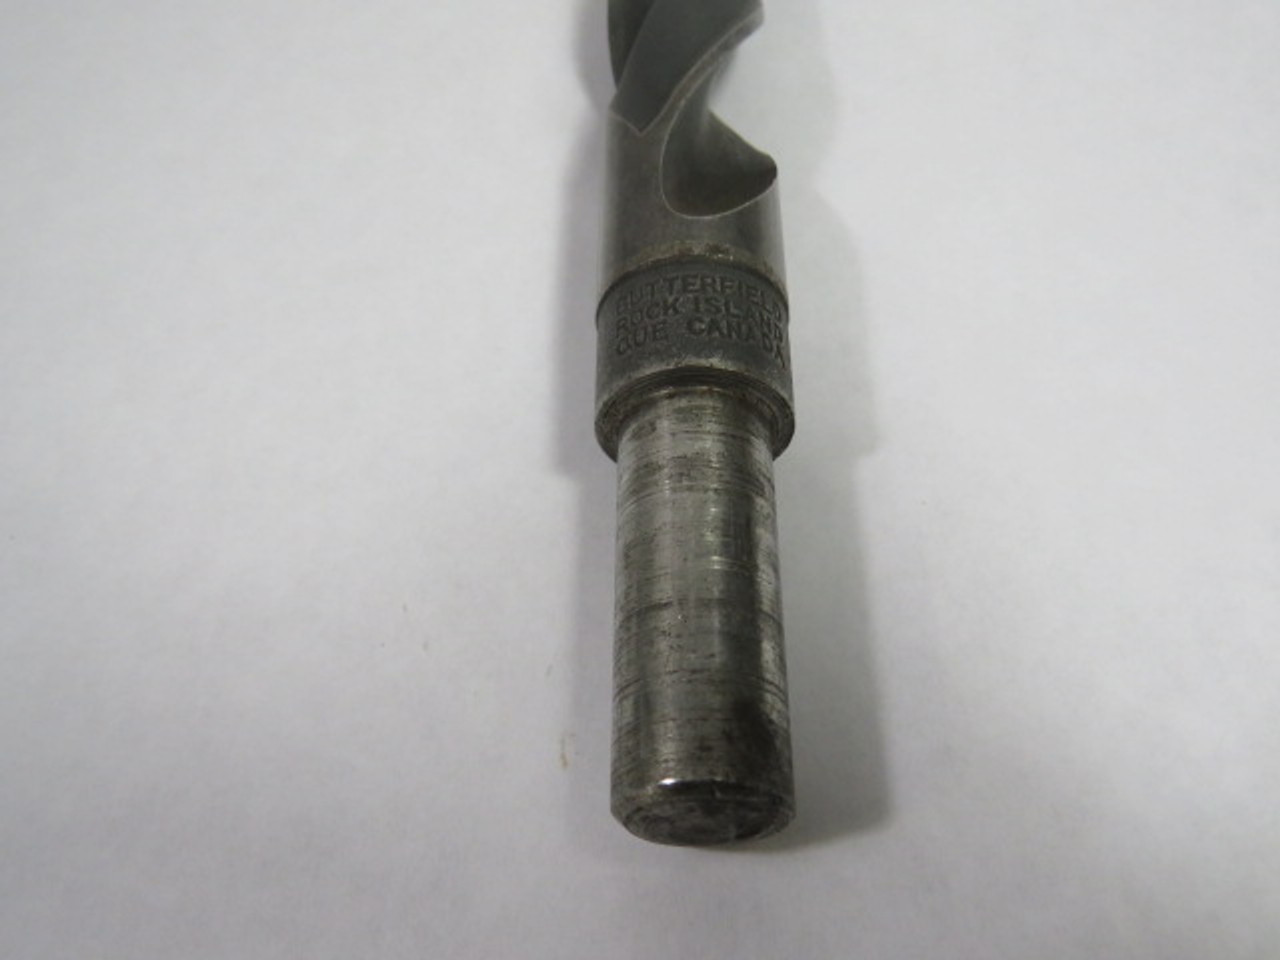 Butterfield HSG8 6NT Twist Drill Size 27/32 Total Length 7-7/8" USED